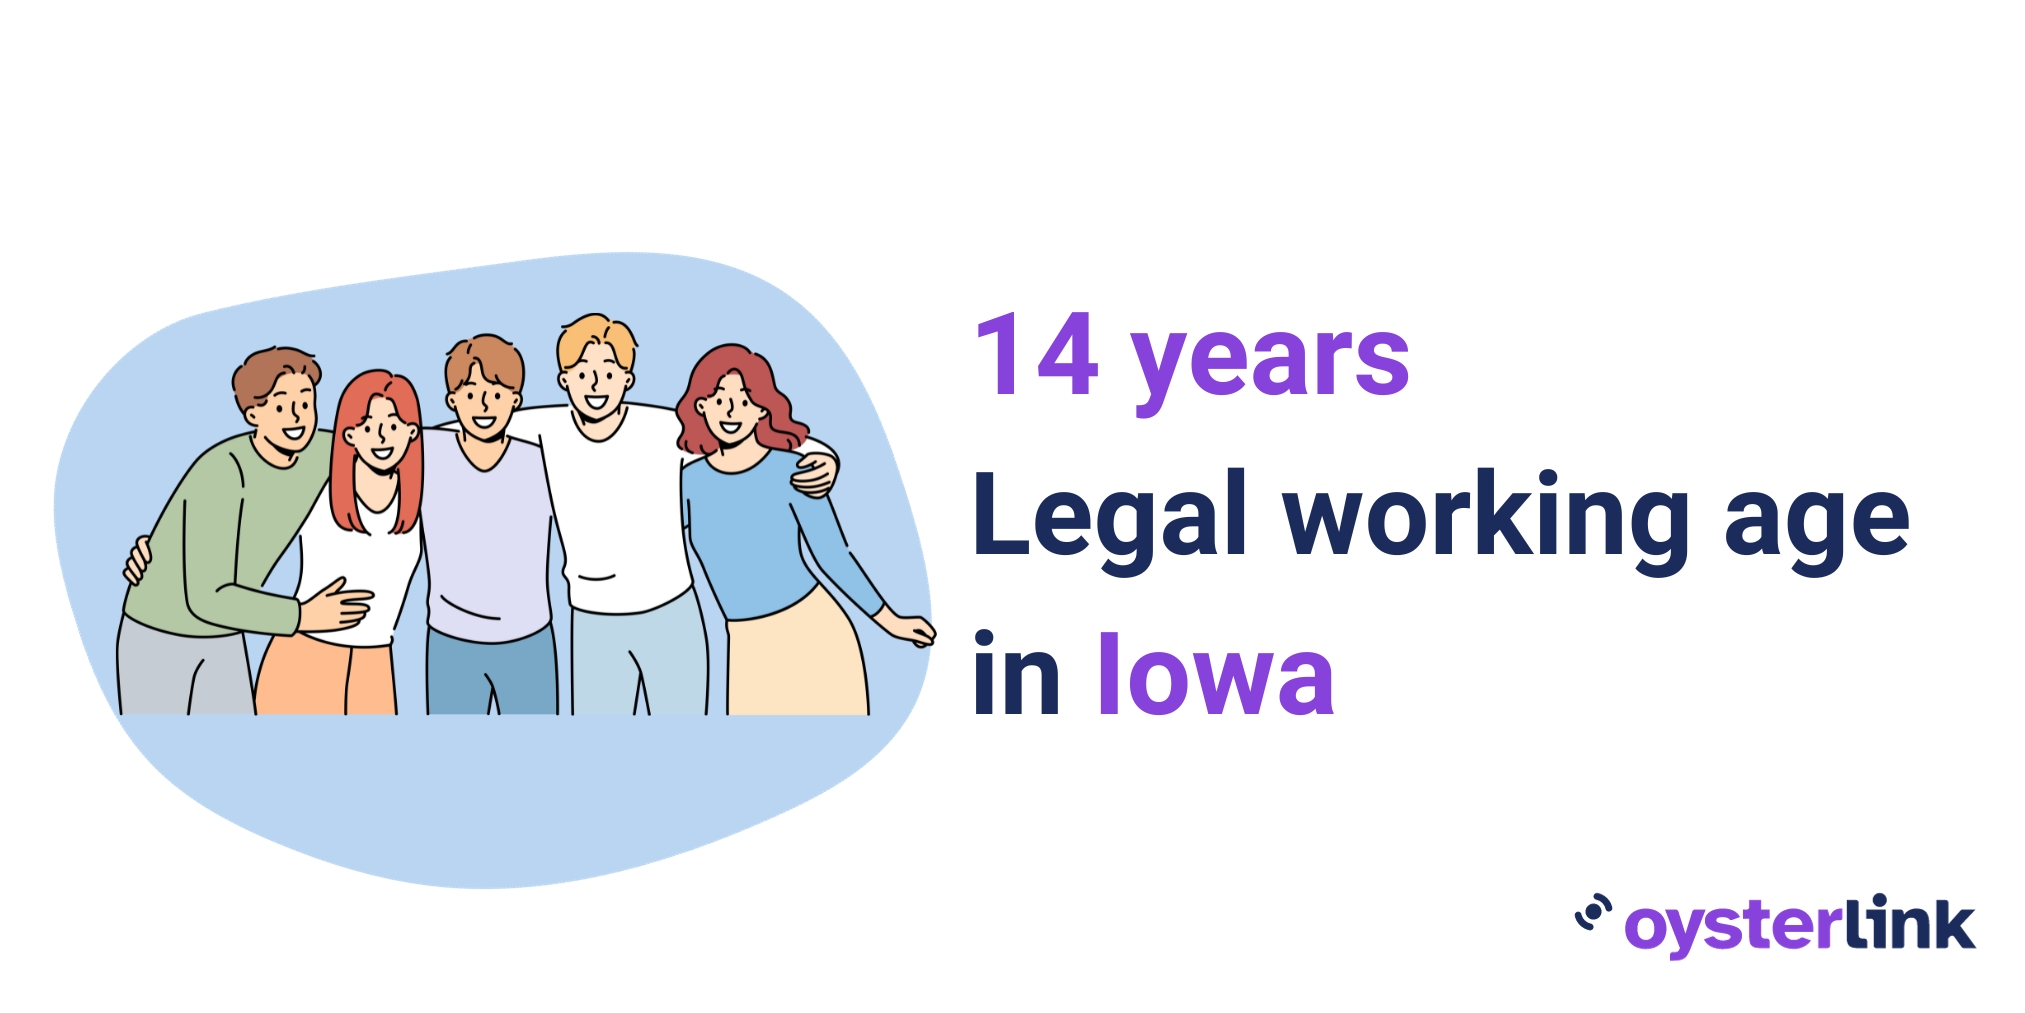 The legal working age in Iowa is 14 years old